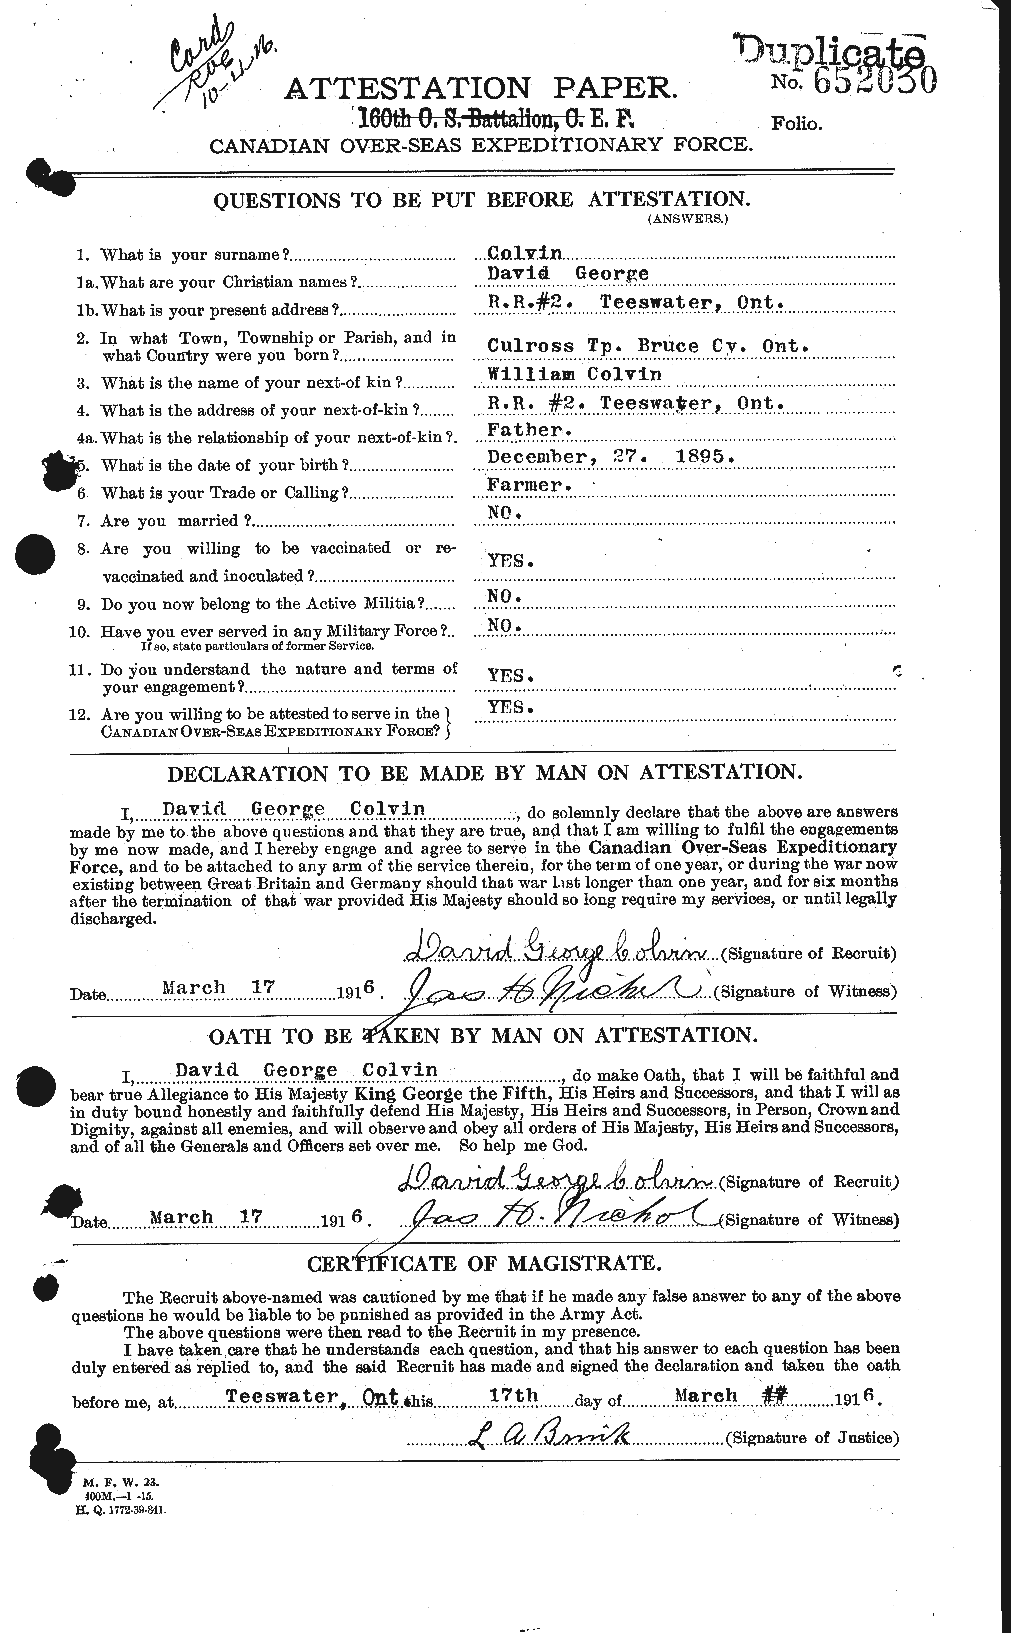 Personnel Records of the First World War - CEF 071908a